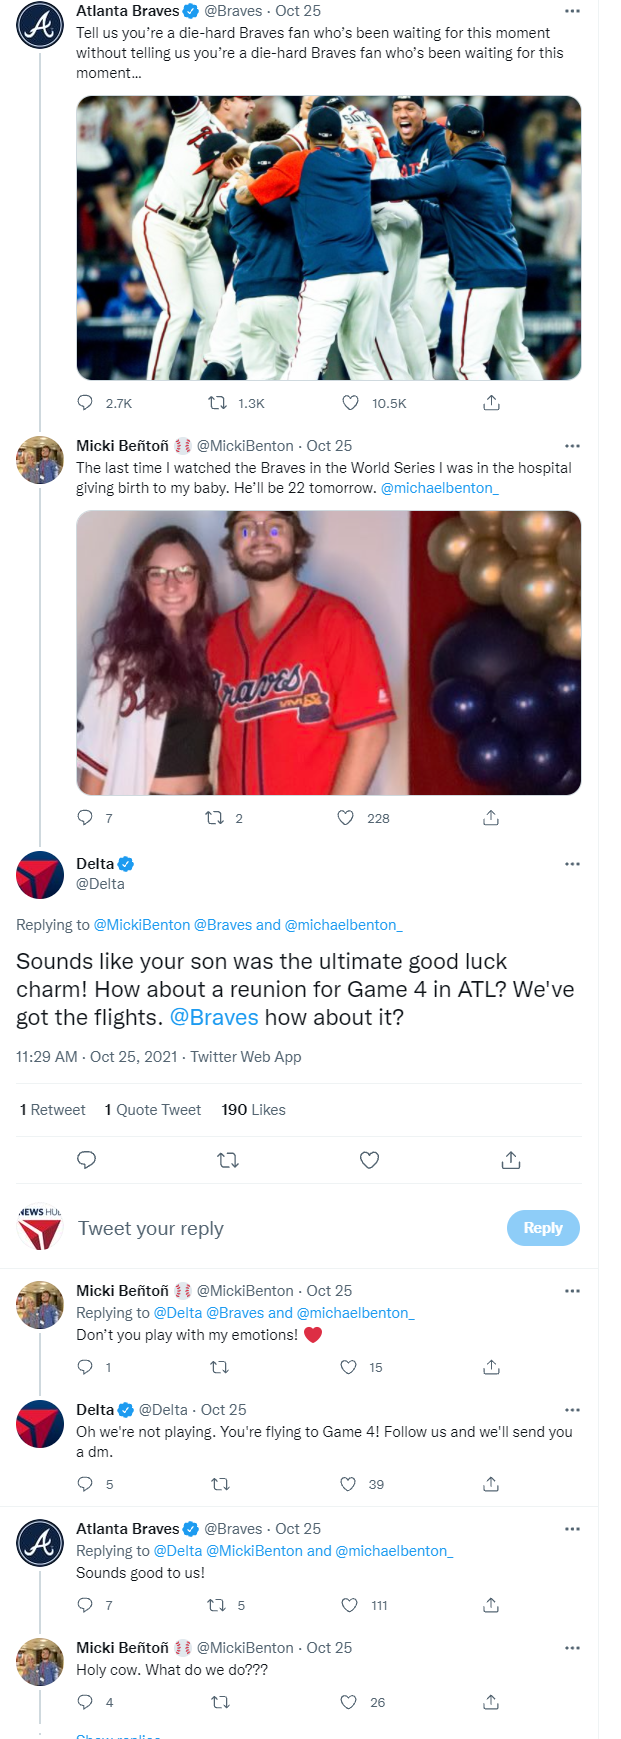 Atlanta Braves World Series Surprise and Delight